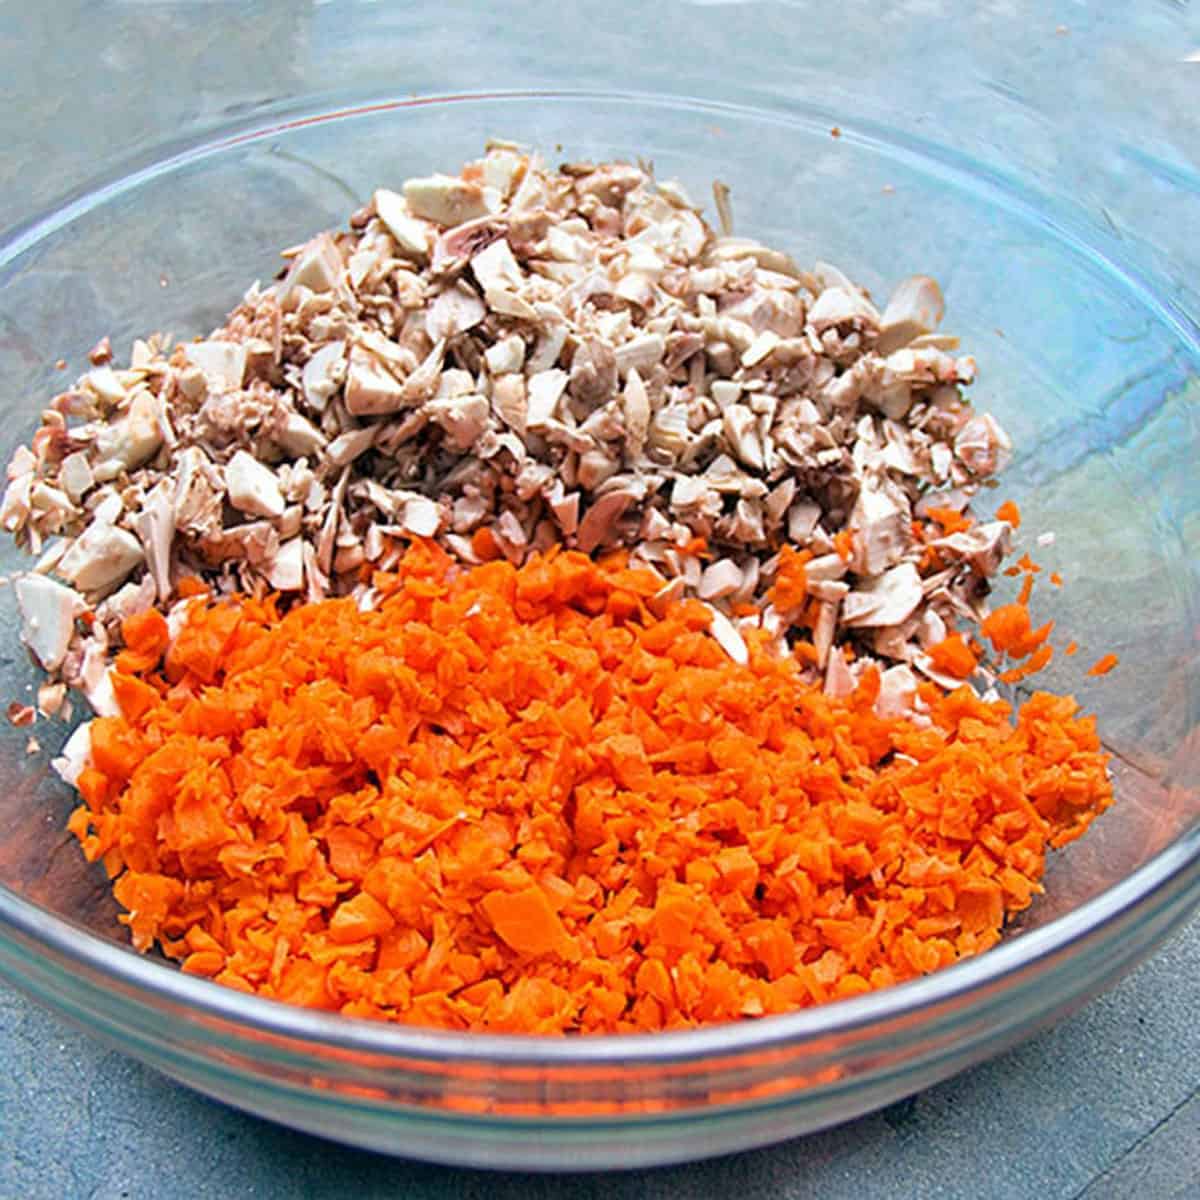 Glass mixing bowl filled with finely chopped carrots and mushrooms